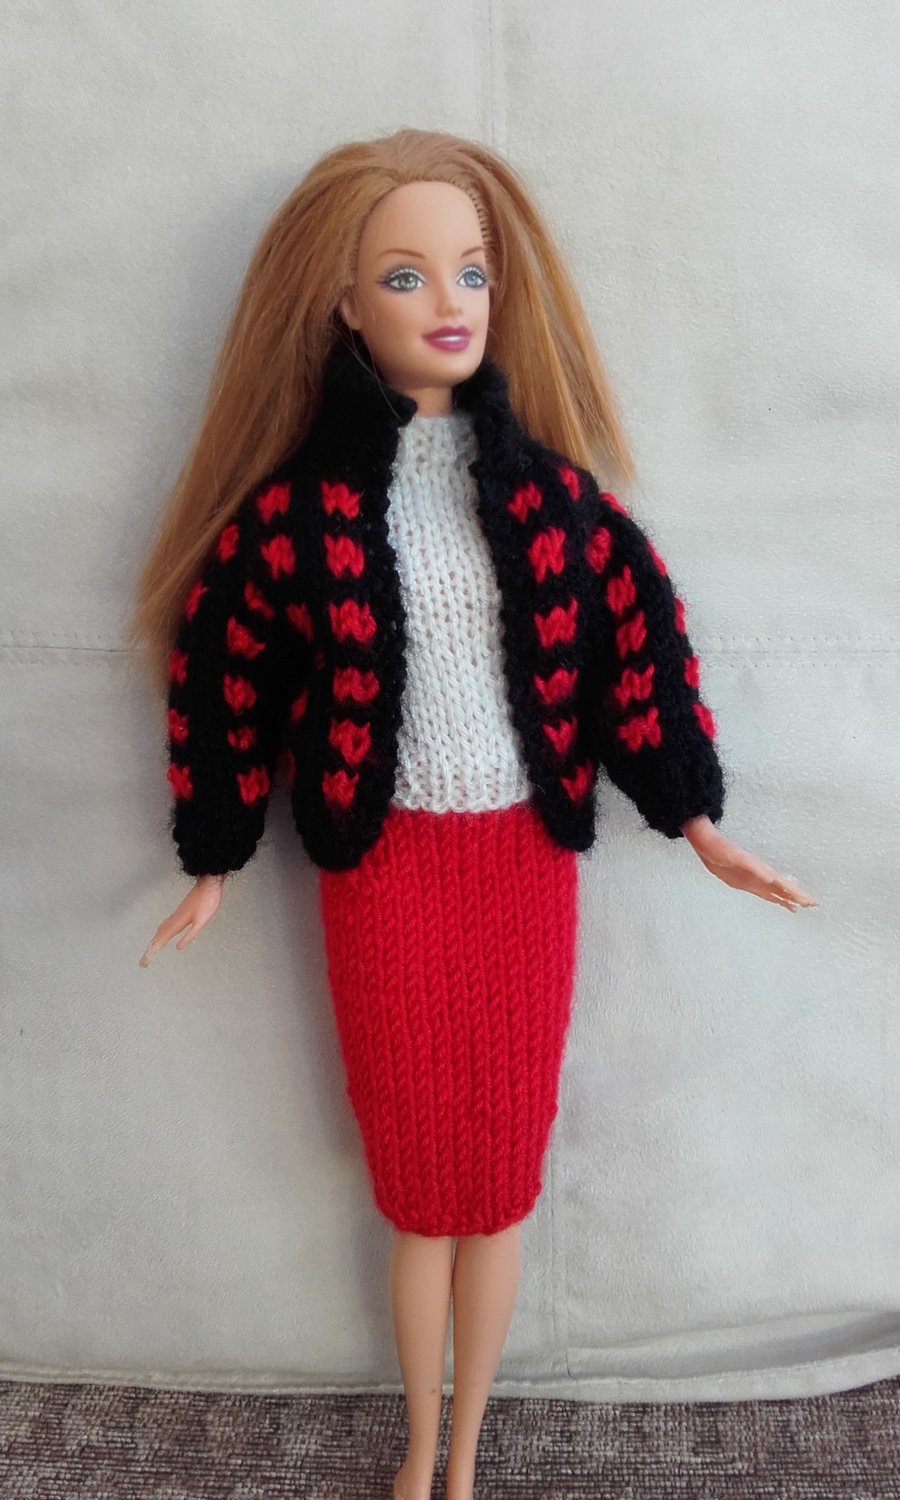 Knitted outfit for Barbie style doll